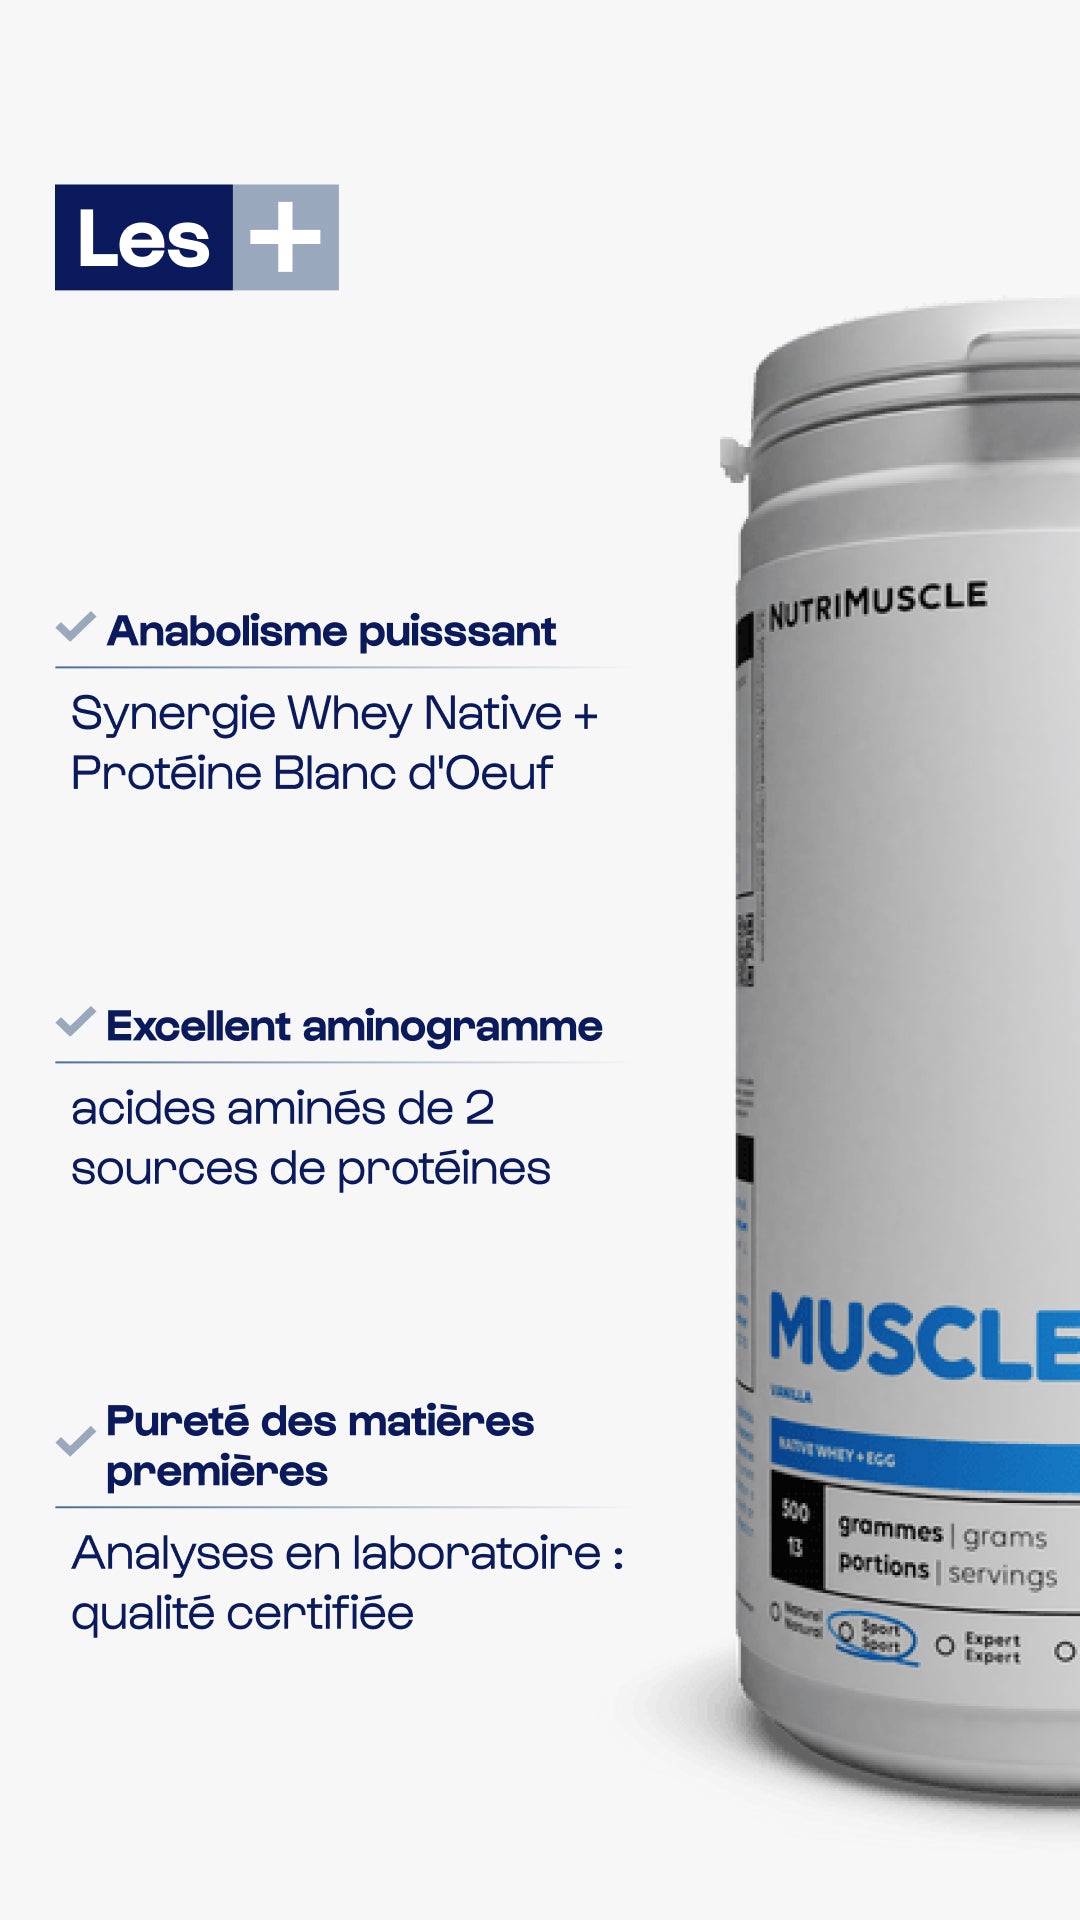 Musclewhegg - Mix di proteine